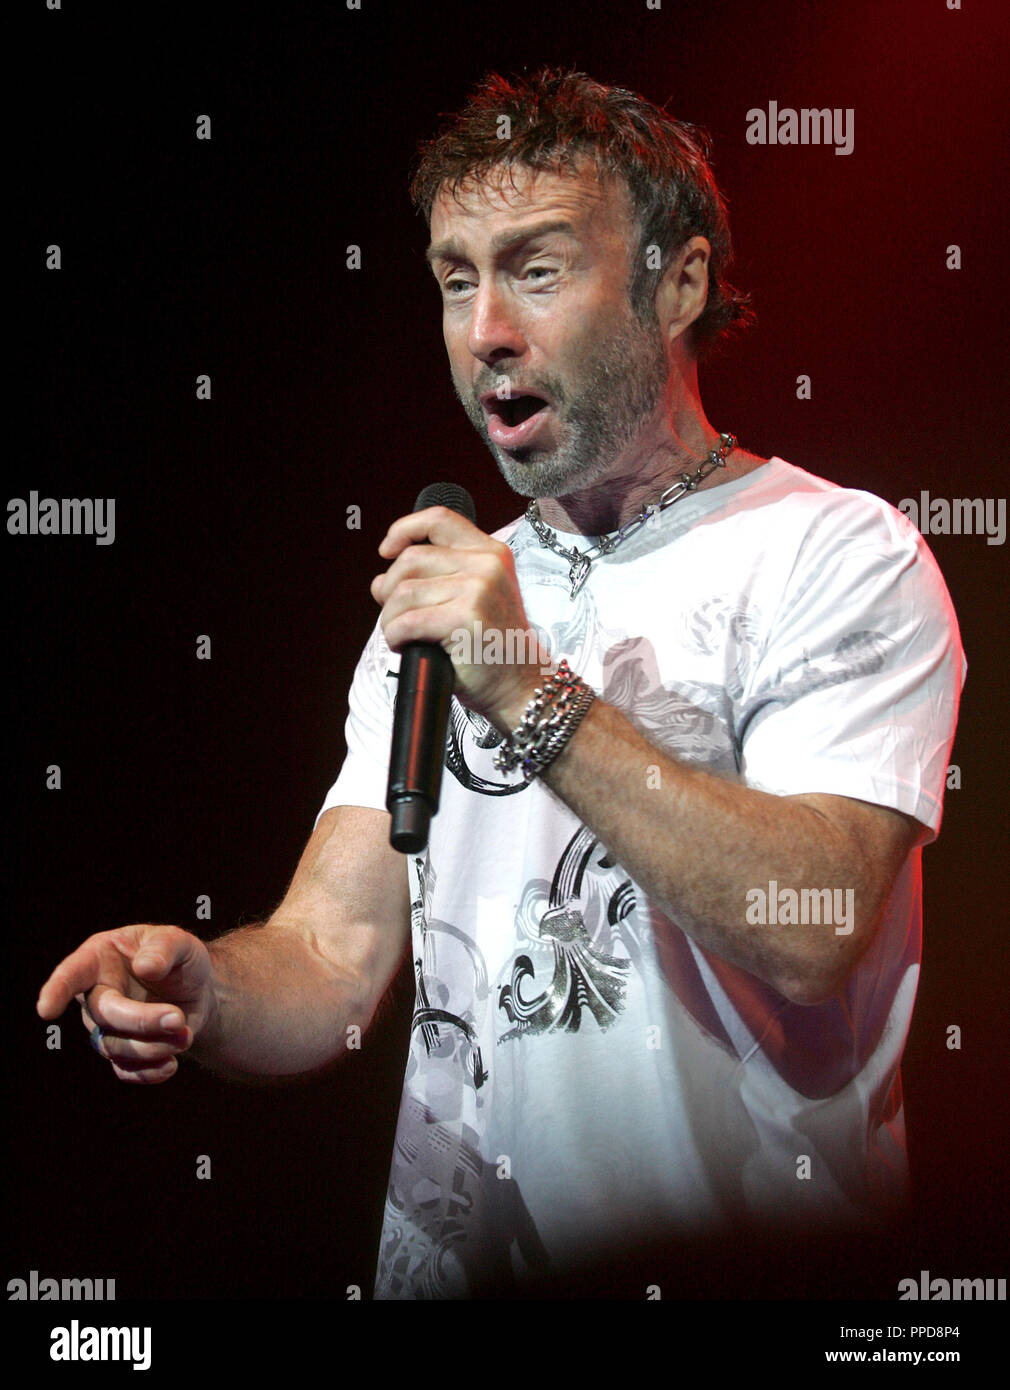 Paul Rodgers with Bad Company performs in concert at the Seminole Hard Rock Hotel and Casino in Hollywood, Florida on April 17, 2009. Stock Photo